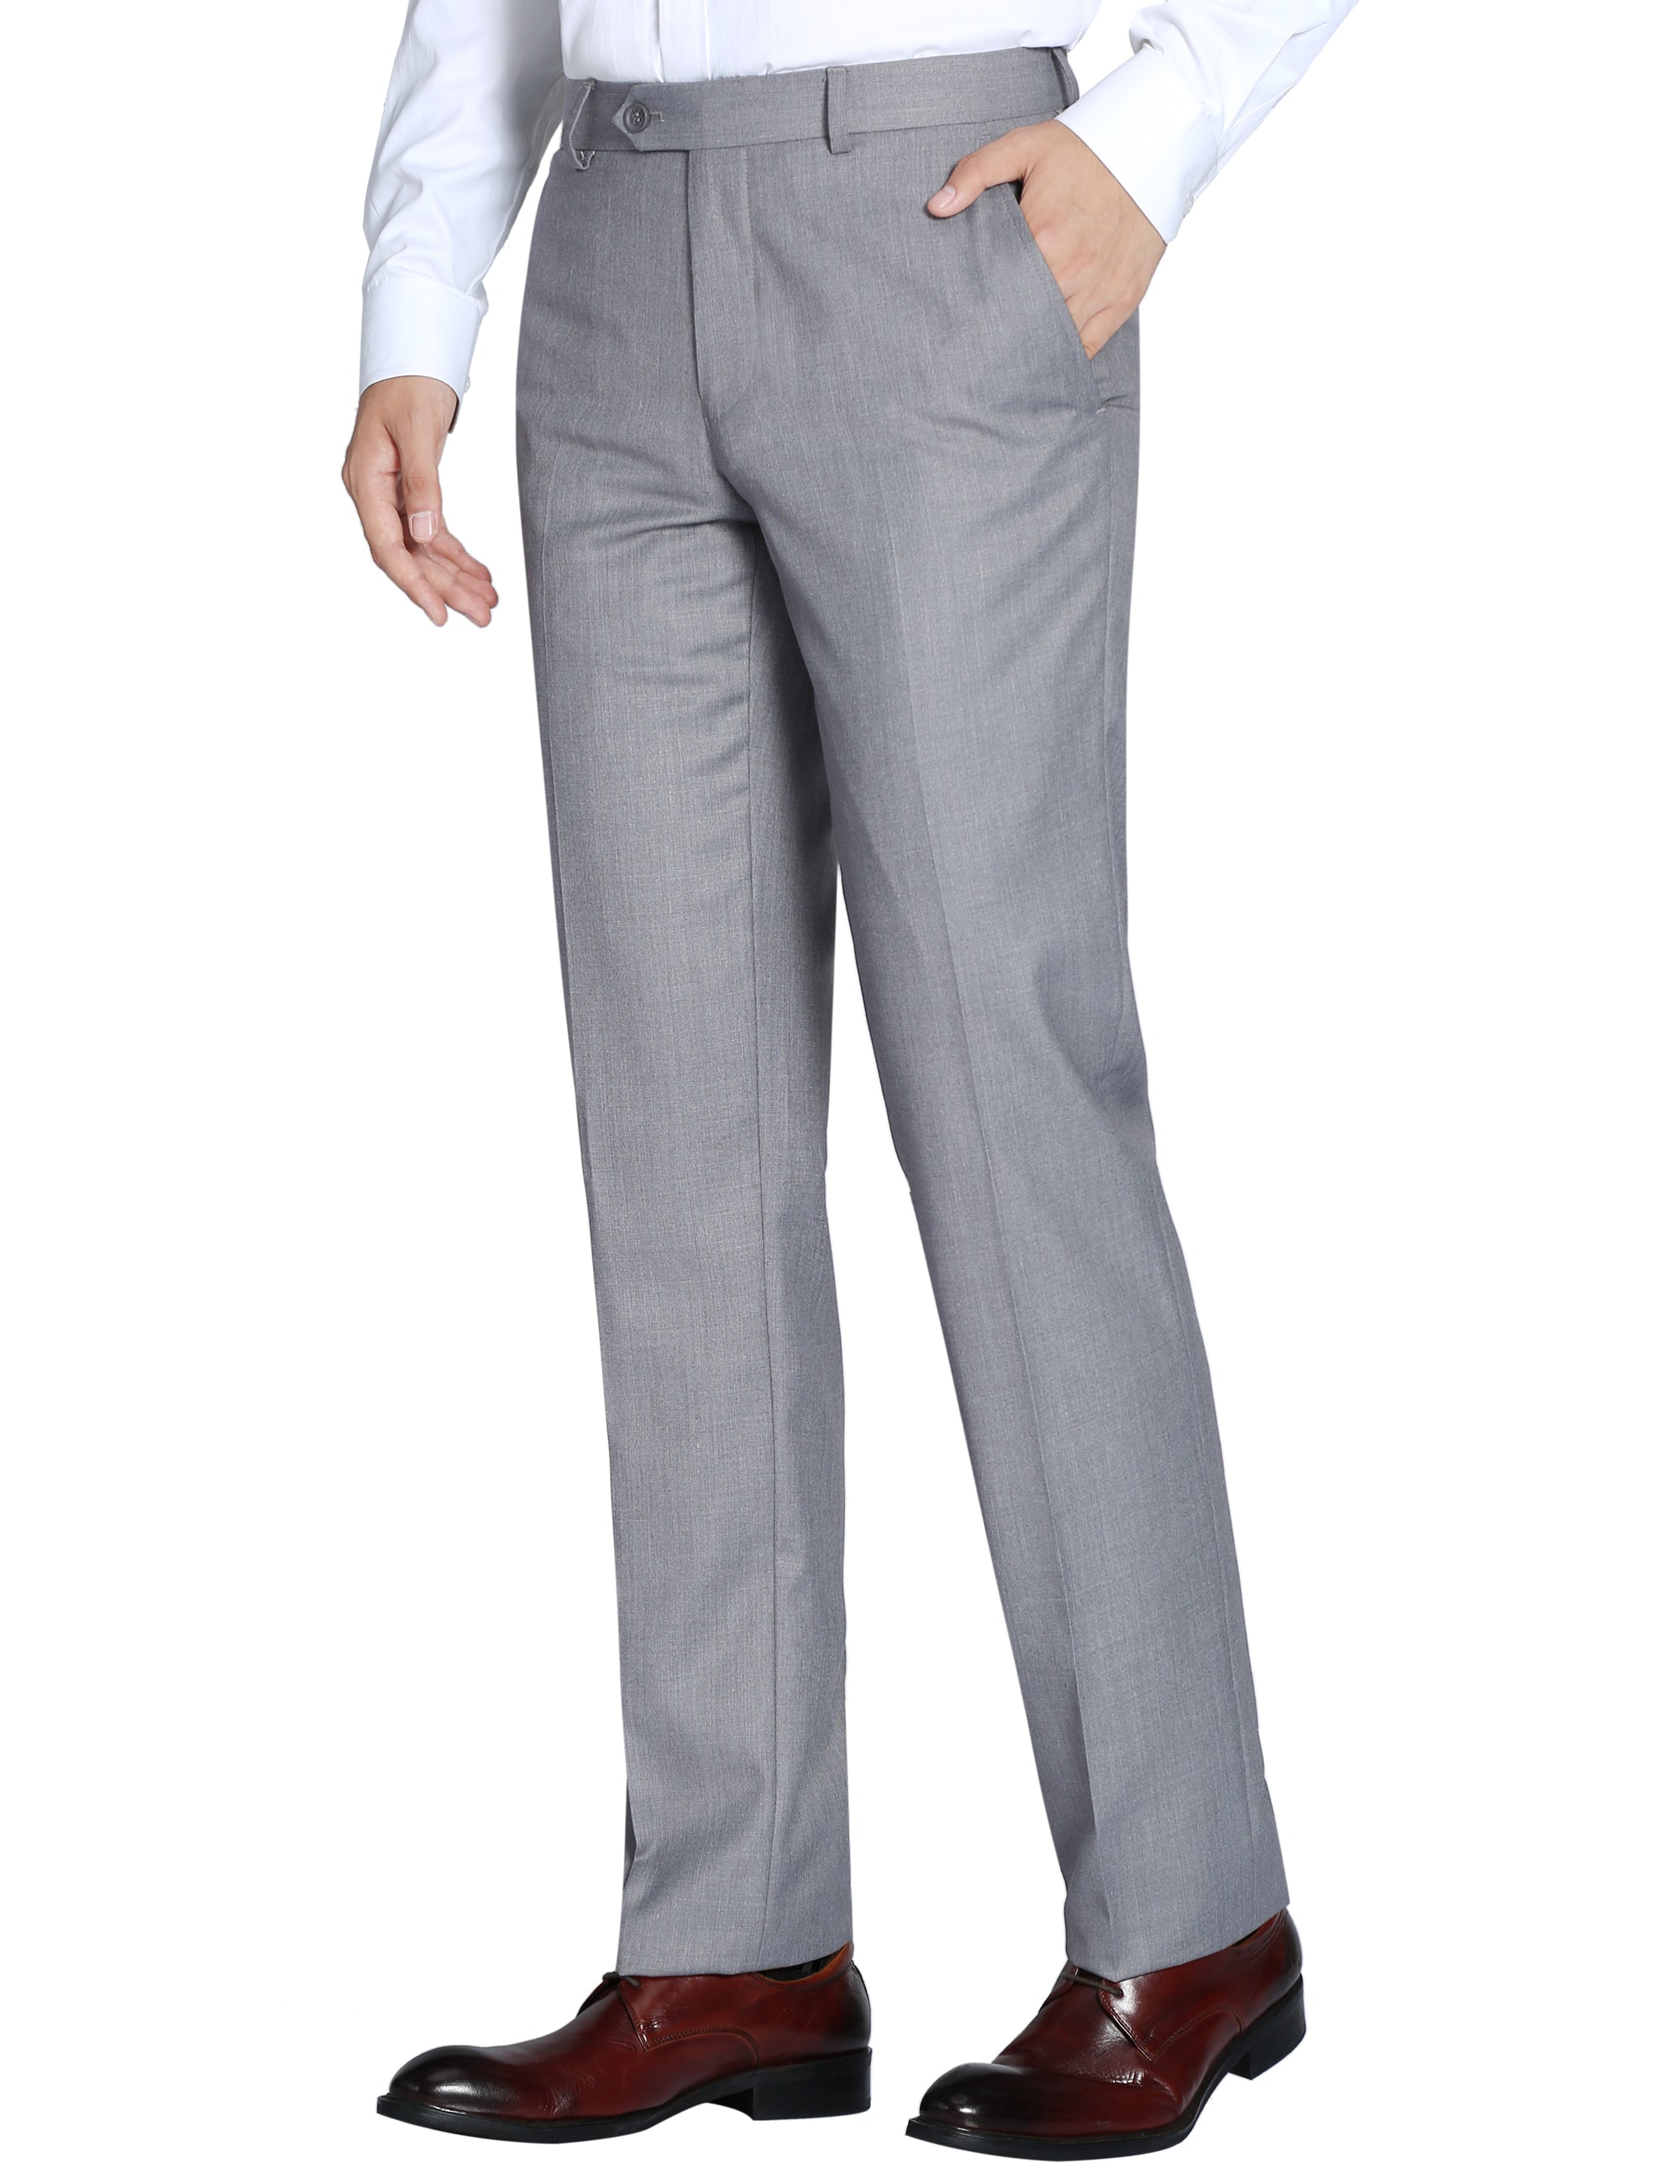 Men's Grey Trousers | Grey Joggers, Chinos & Suit Trousers | Moss